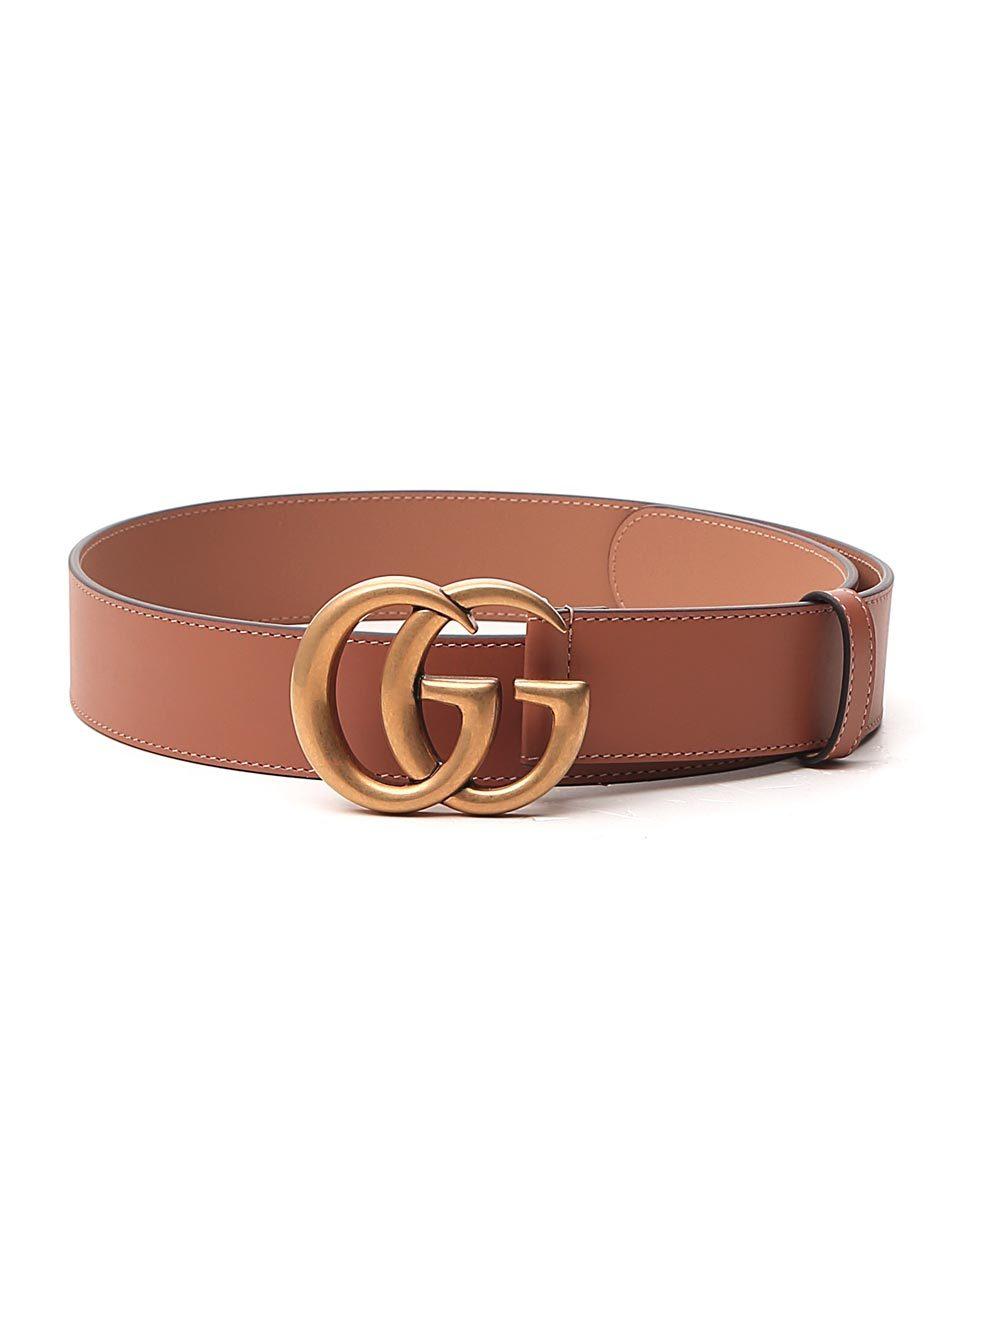 Gucci Leather GG Buckle Belt in Brown - Lyst